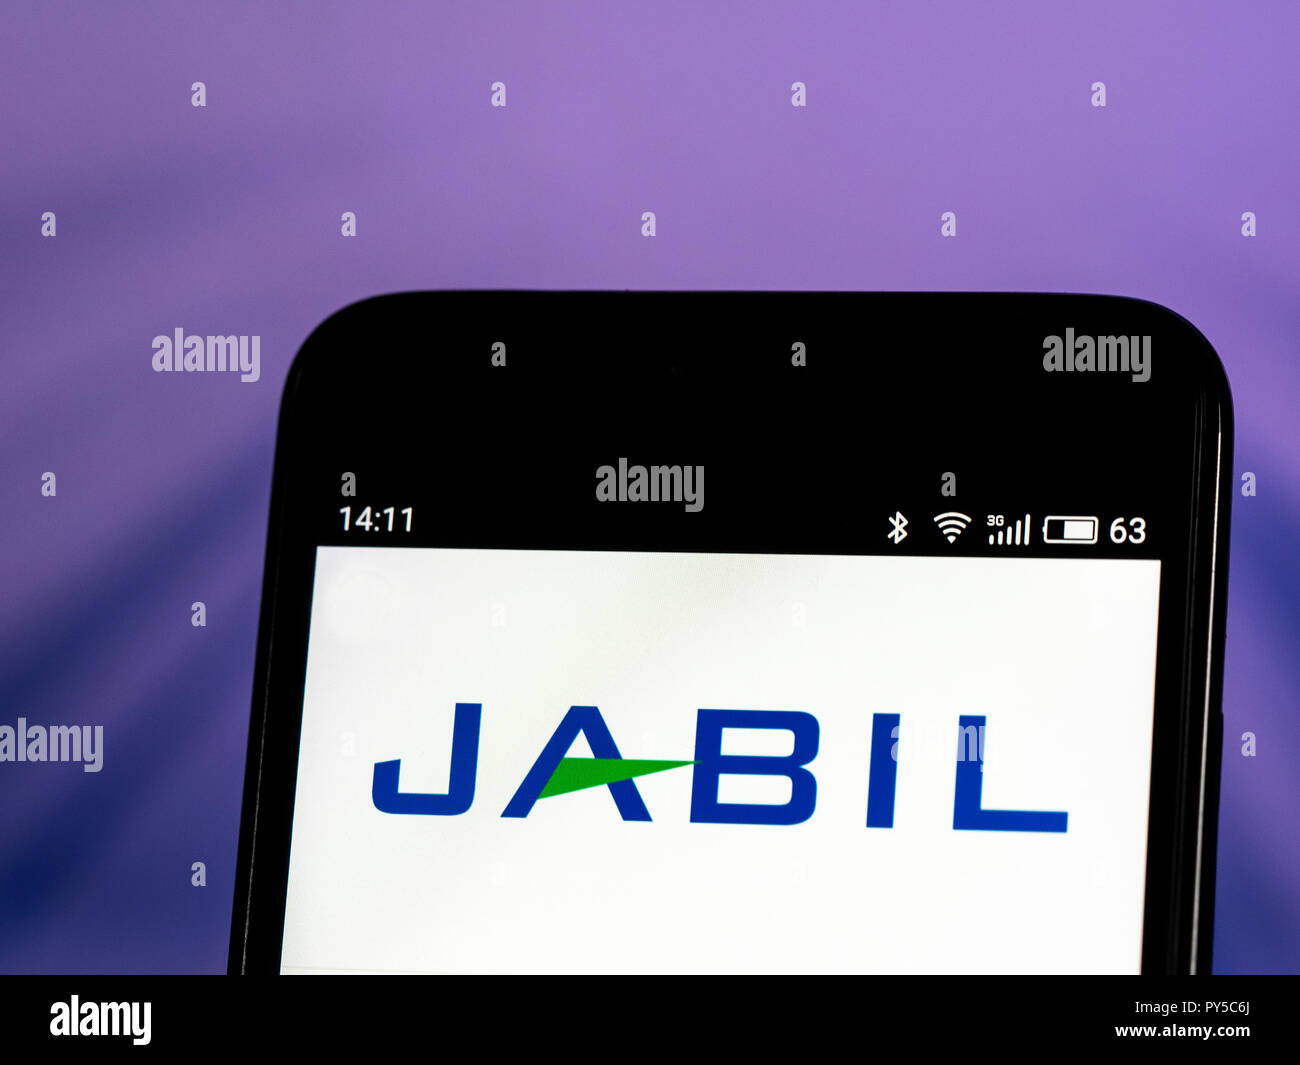 Jabil Company logo seen displayed on smart phone. Jabil Inc. is a United States-based global manufacturing services company. Jabil has 90 facilities in 23 countries, and 175,000 employees worldwide. Stock Photo